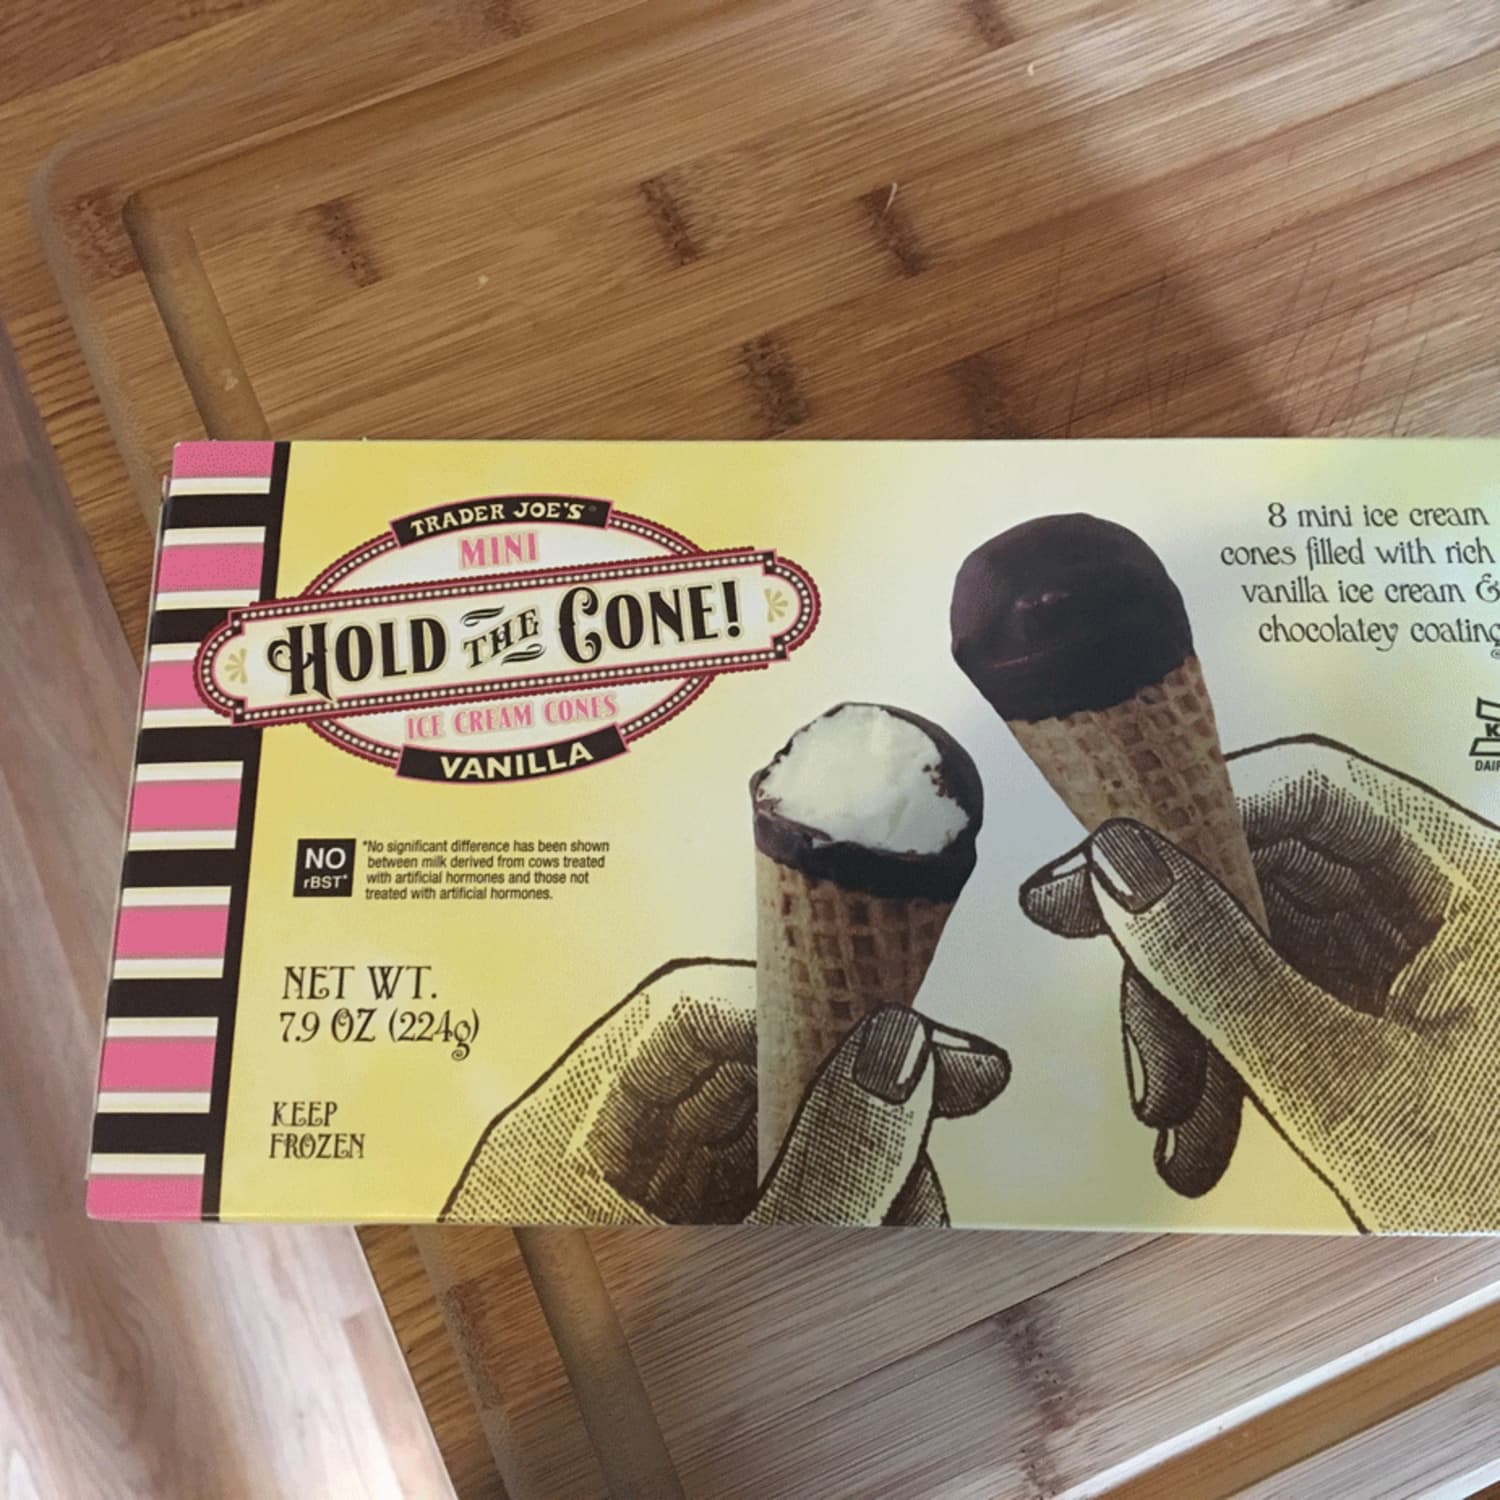 🍦Tiny ice cream cones are one of the best things Trader Joe's has